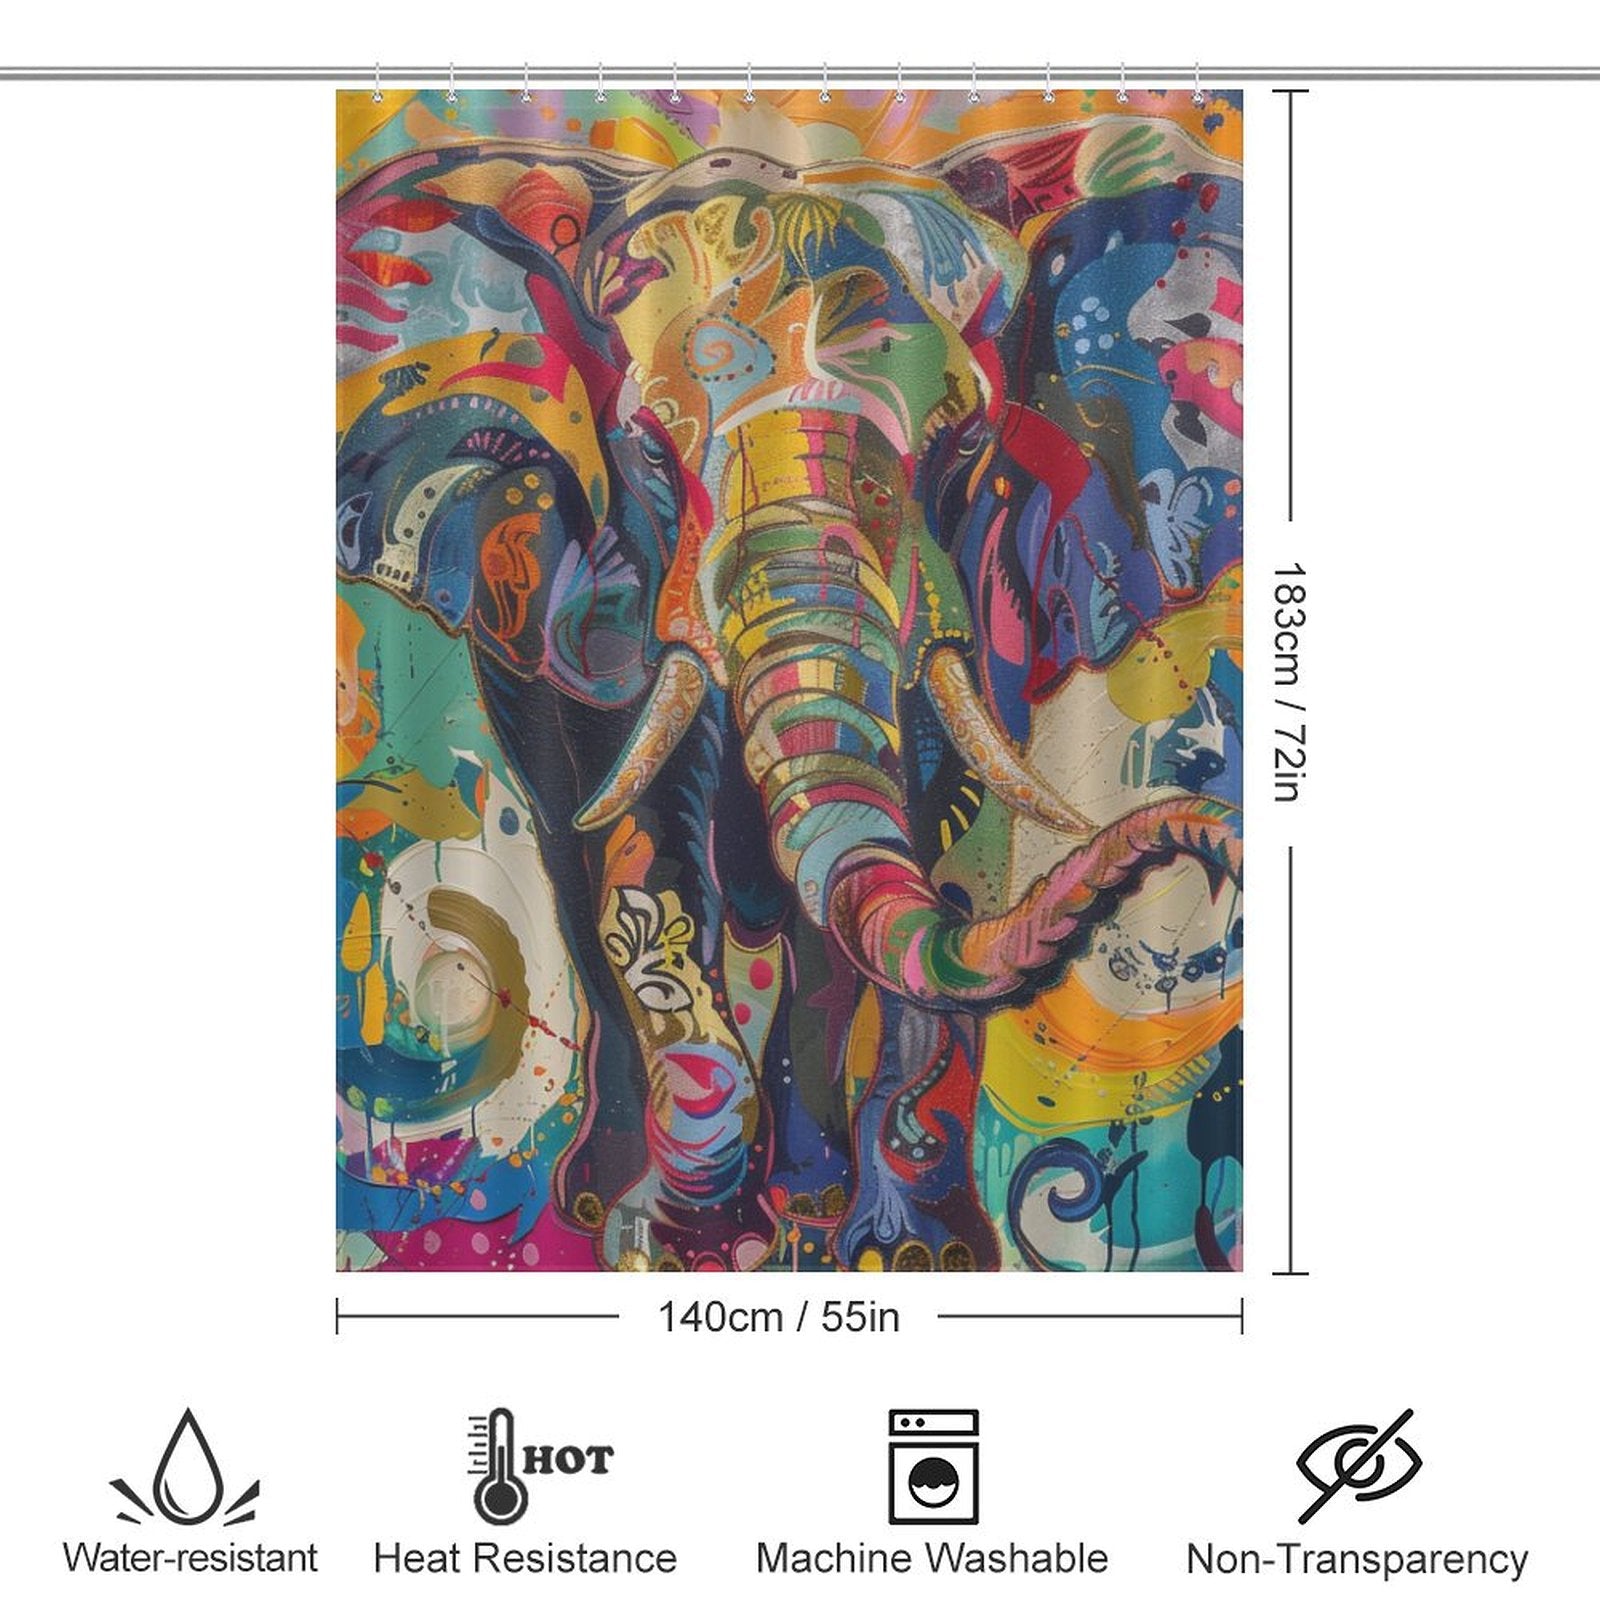 Brighten up your bathroom decor with this Multi Colored Happy Elephant Shower Curtain-Cottoncat by Cotton Cat, featuring dimensions of 183cm by 140cm (72in by 55in). This vibrant shower curtain is water-resistant, heat-resistant, machine washable, and non-transparent.